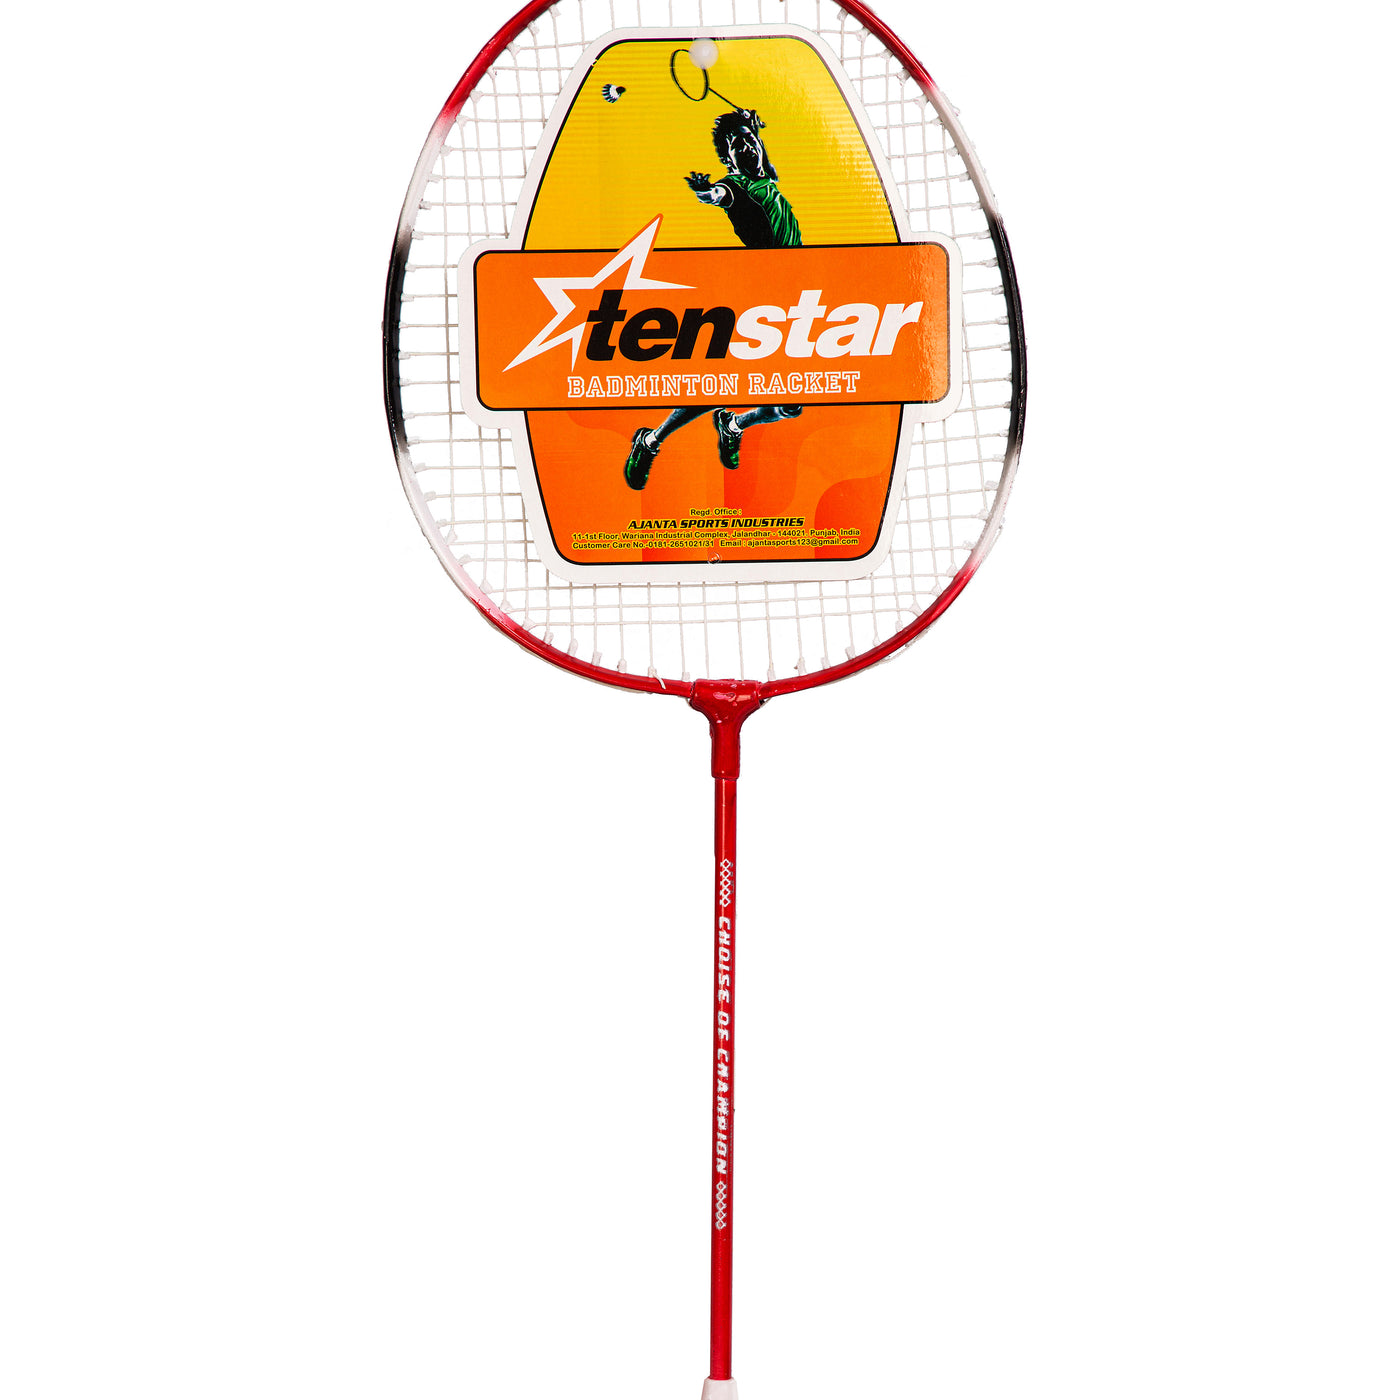 Tenstar Tenstar Sports Badminton Racket Set With Cover freeshipping - athletive Badminton Racquets & Sets athletive